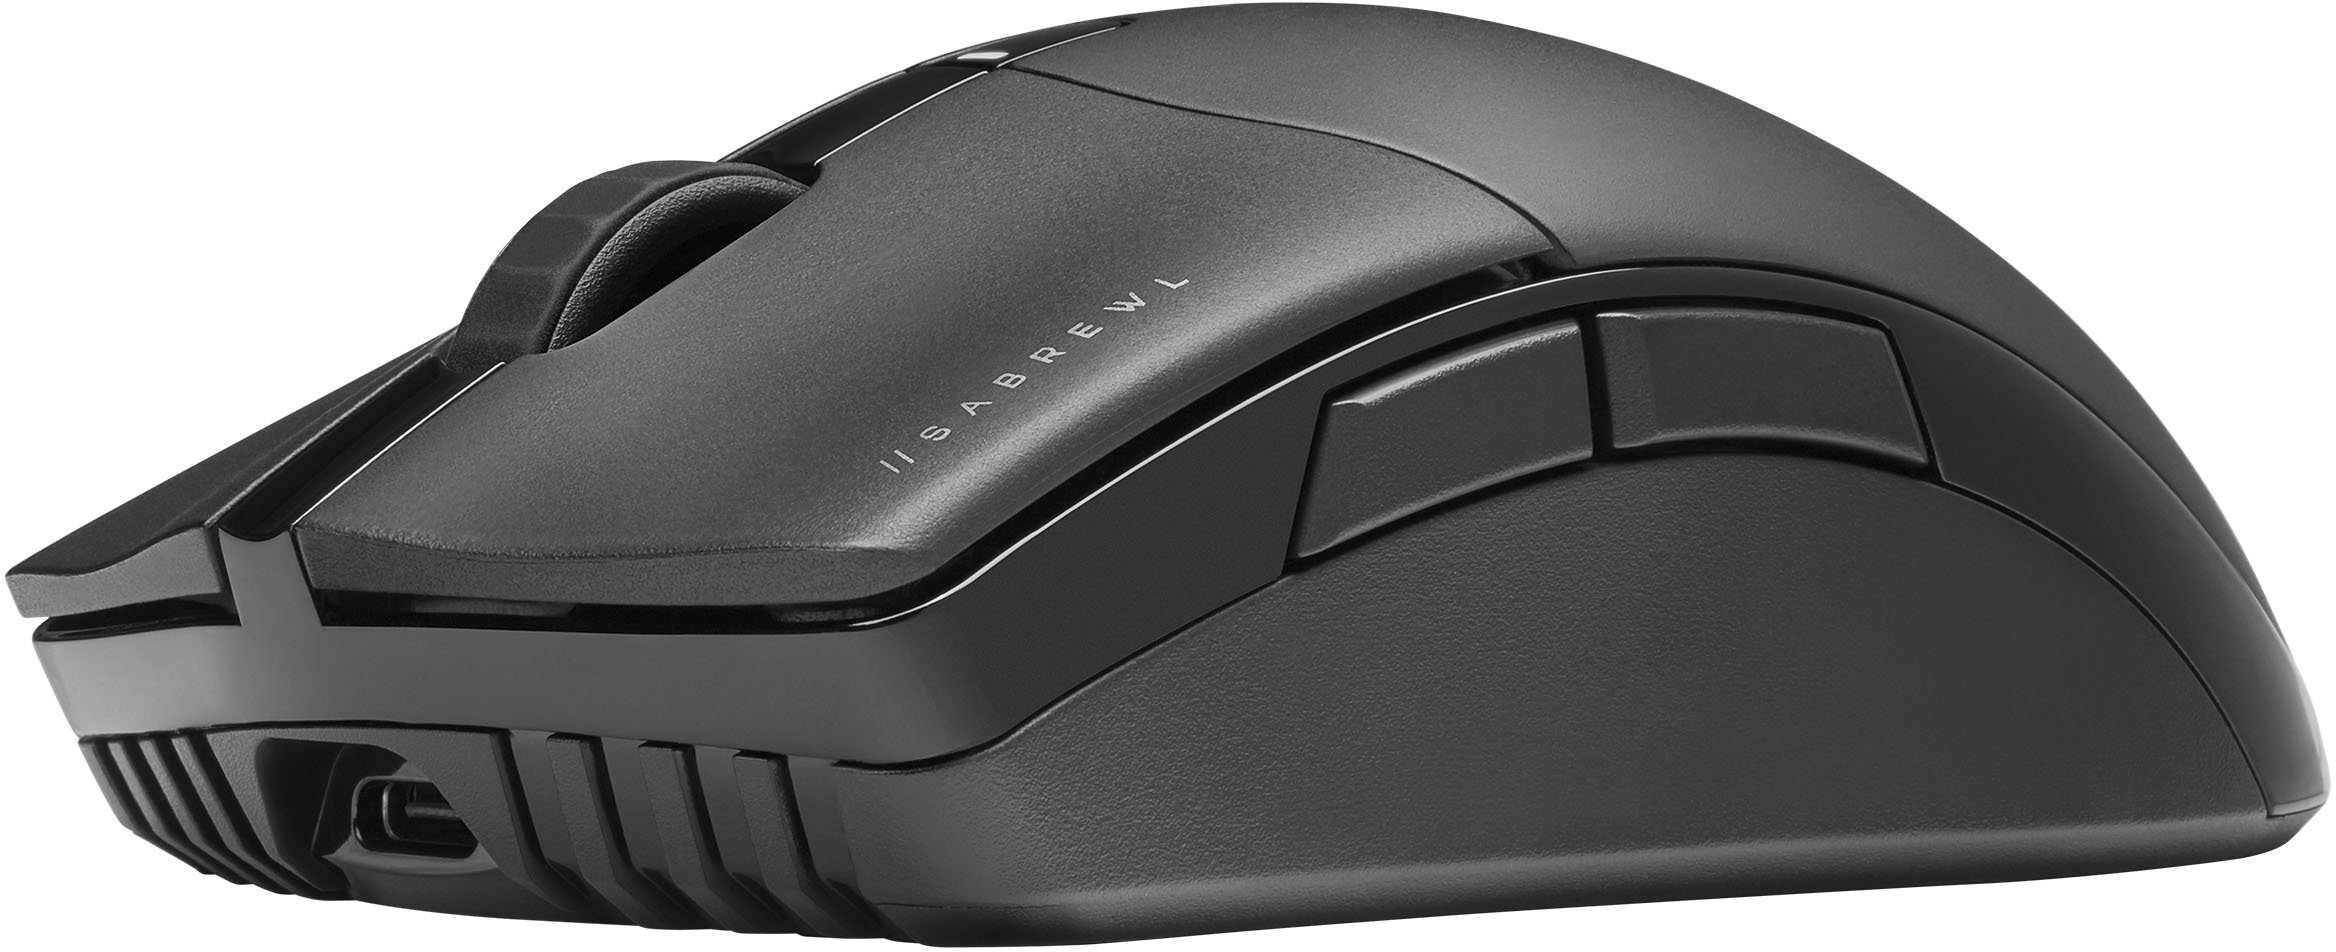 CORSAIR CHAMPION SERIES SABRE RGB PRO Lightweight Wireless Optical Gaming  Mouse with 79g Ultra-lightweight design Black CH-9313211-NA - Best Buy